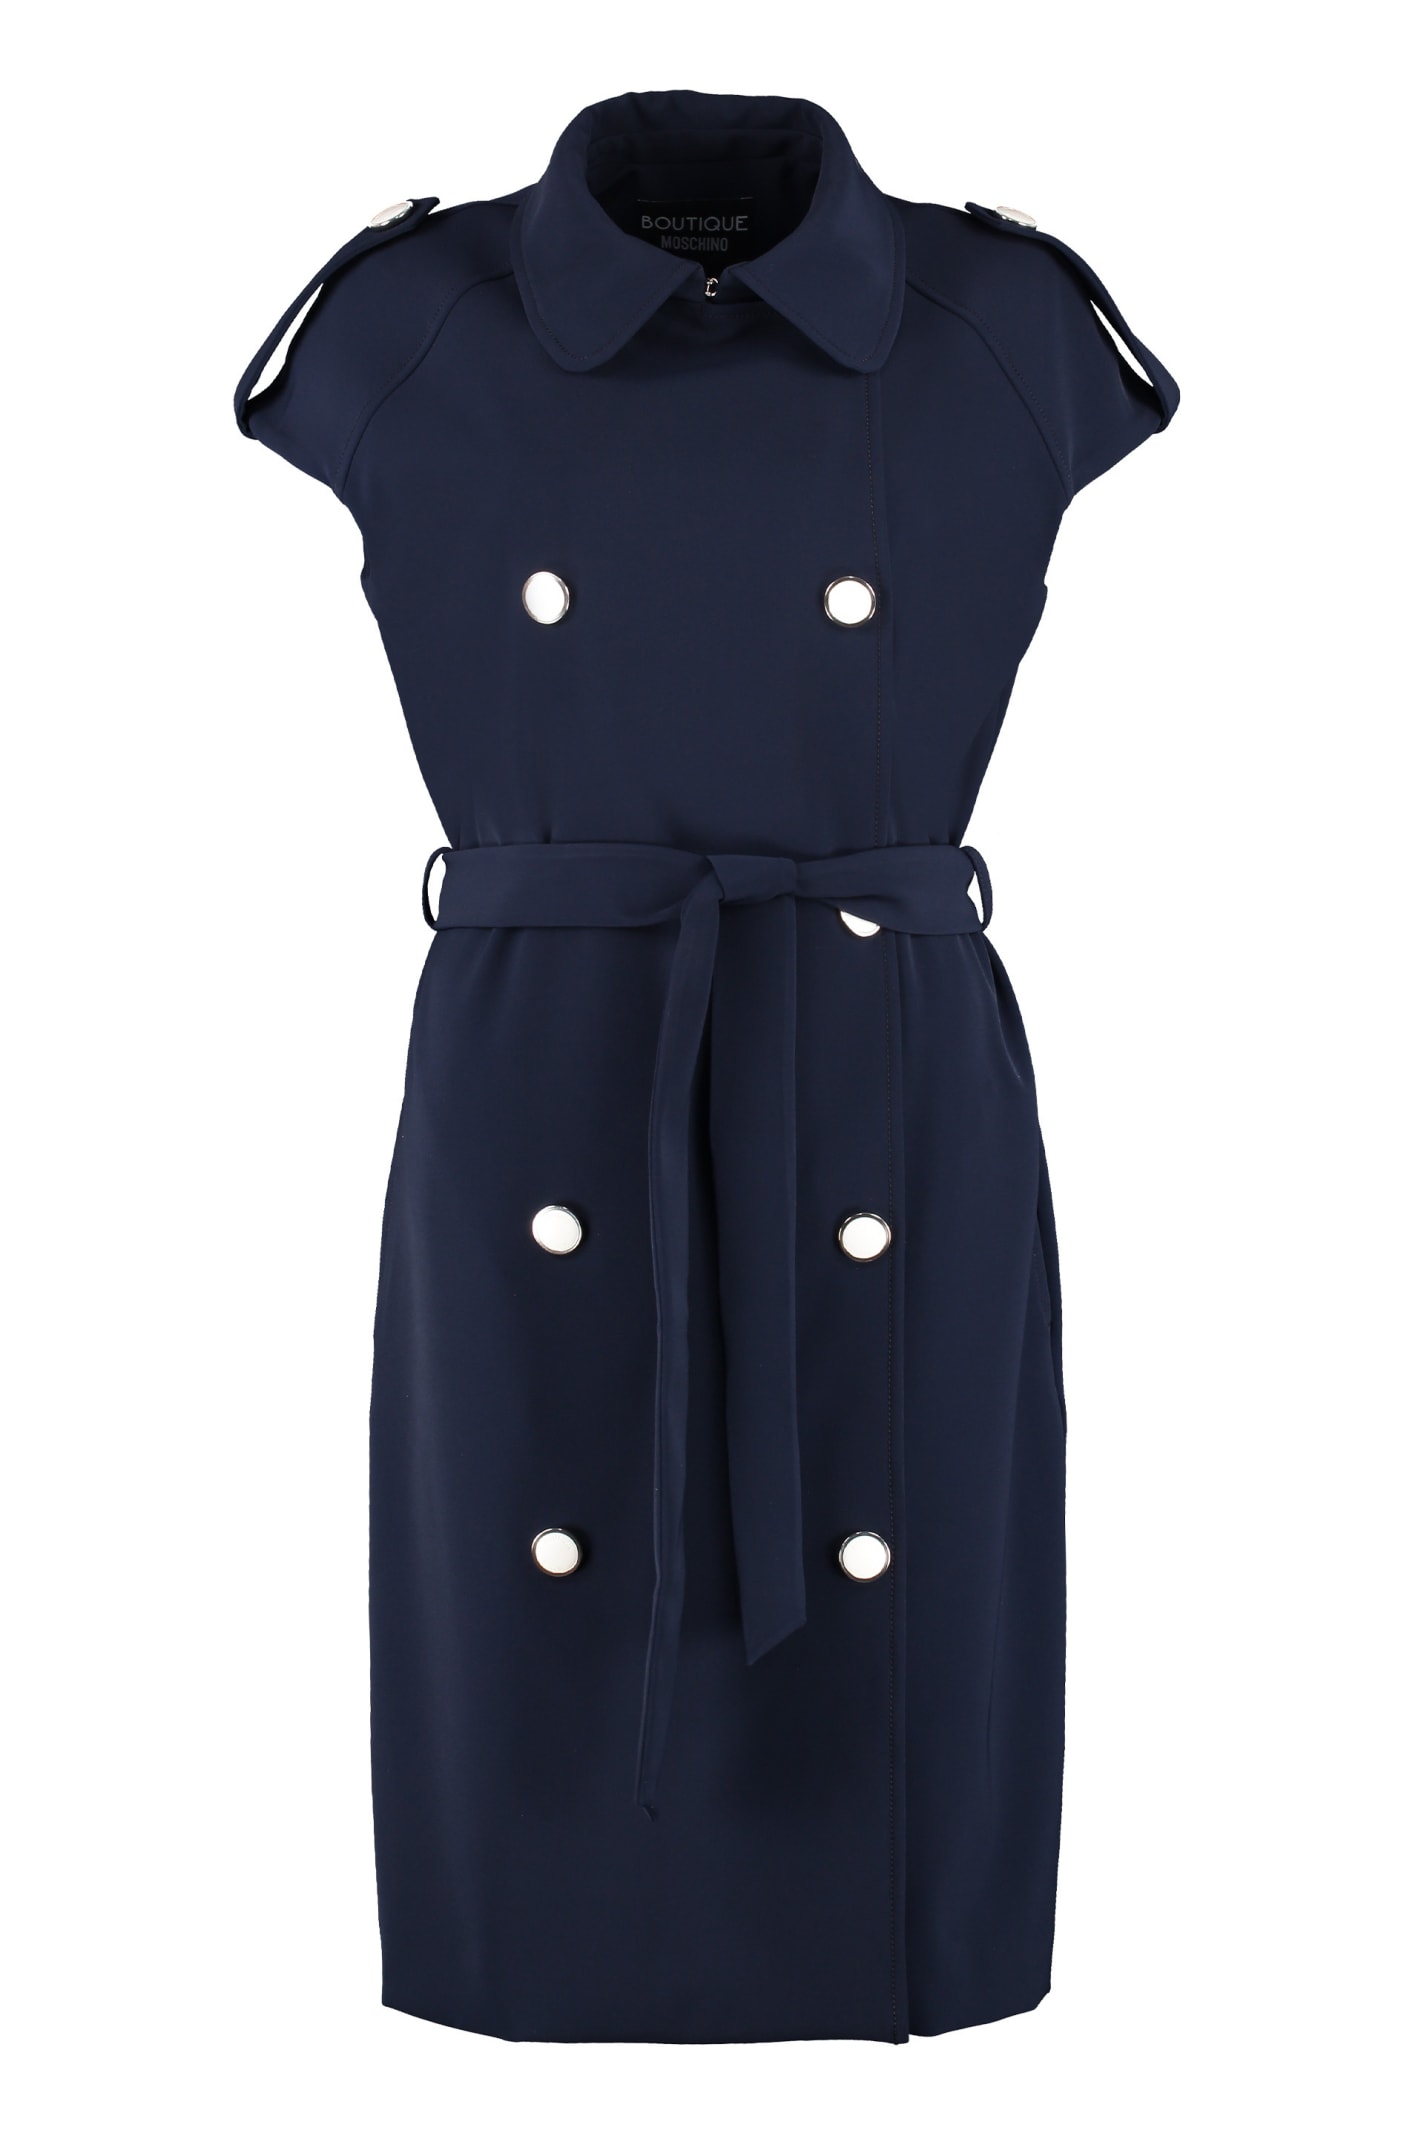 Boutique Moschino Belted Shirtdress